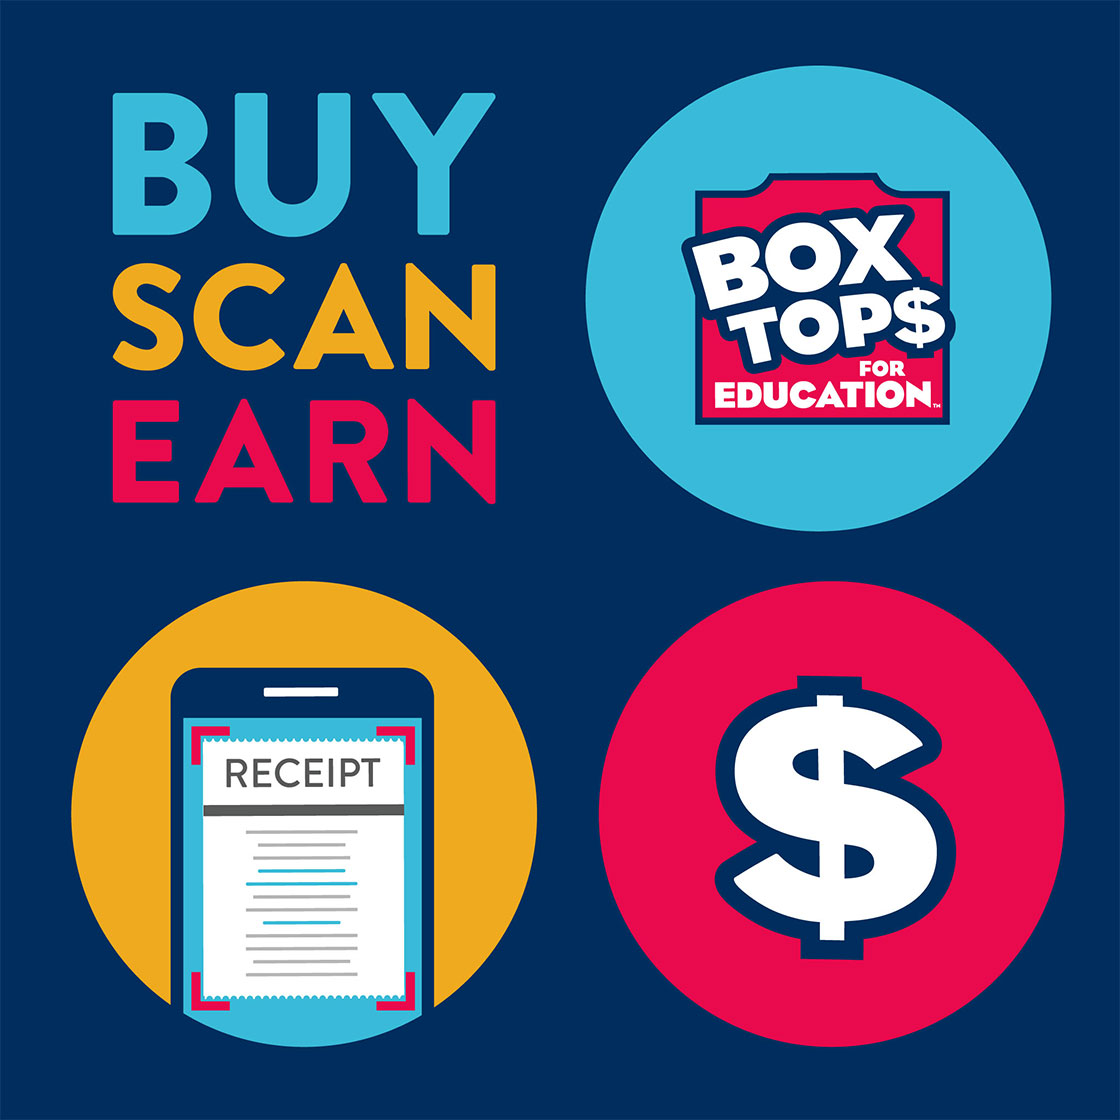 BUY SCAN EARN - BOX TOPS FOR EDUCATION